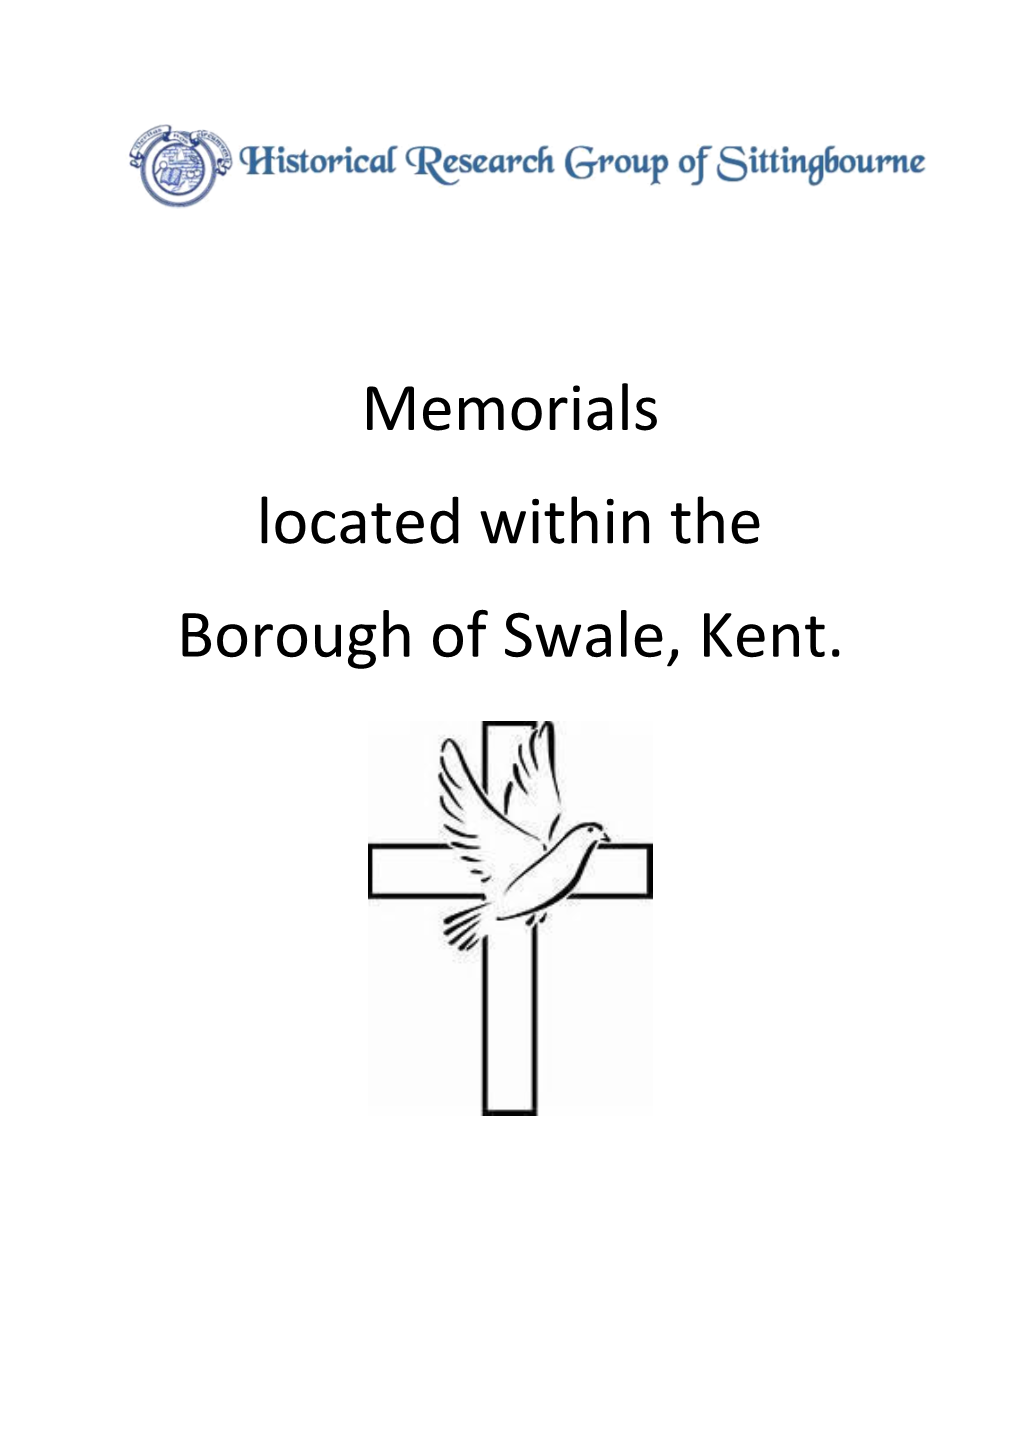 Memorials Located Within the Borough of Swale, Kent